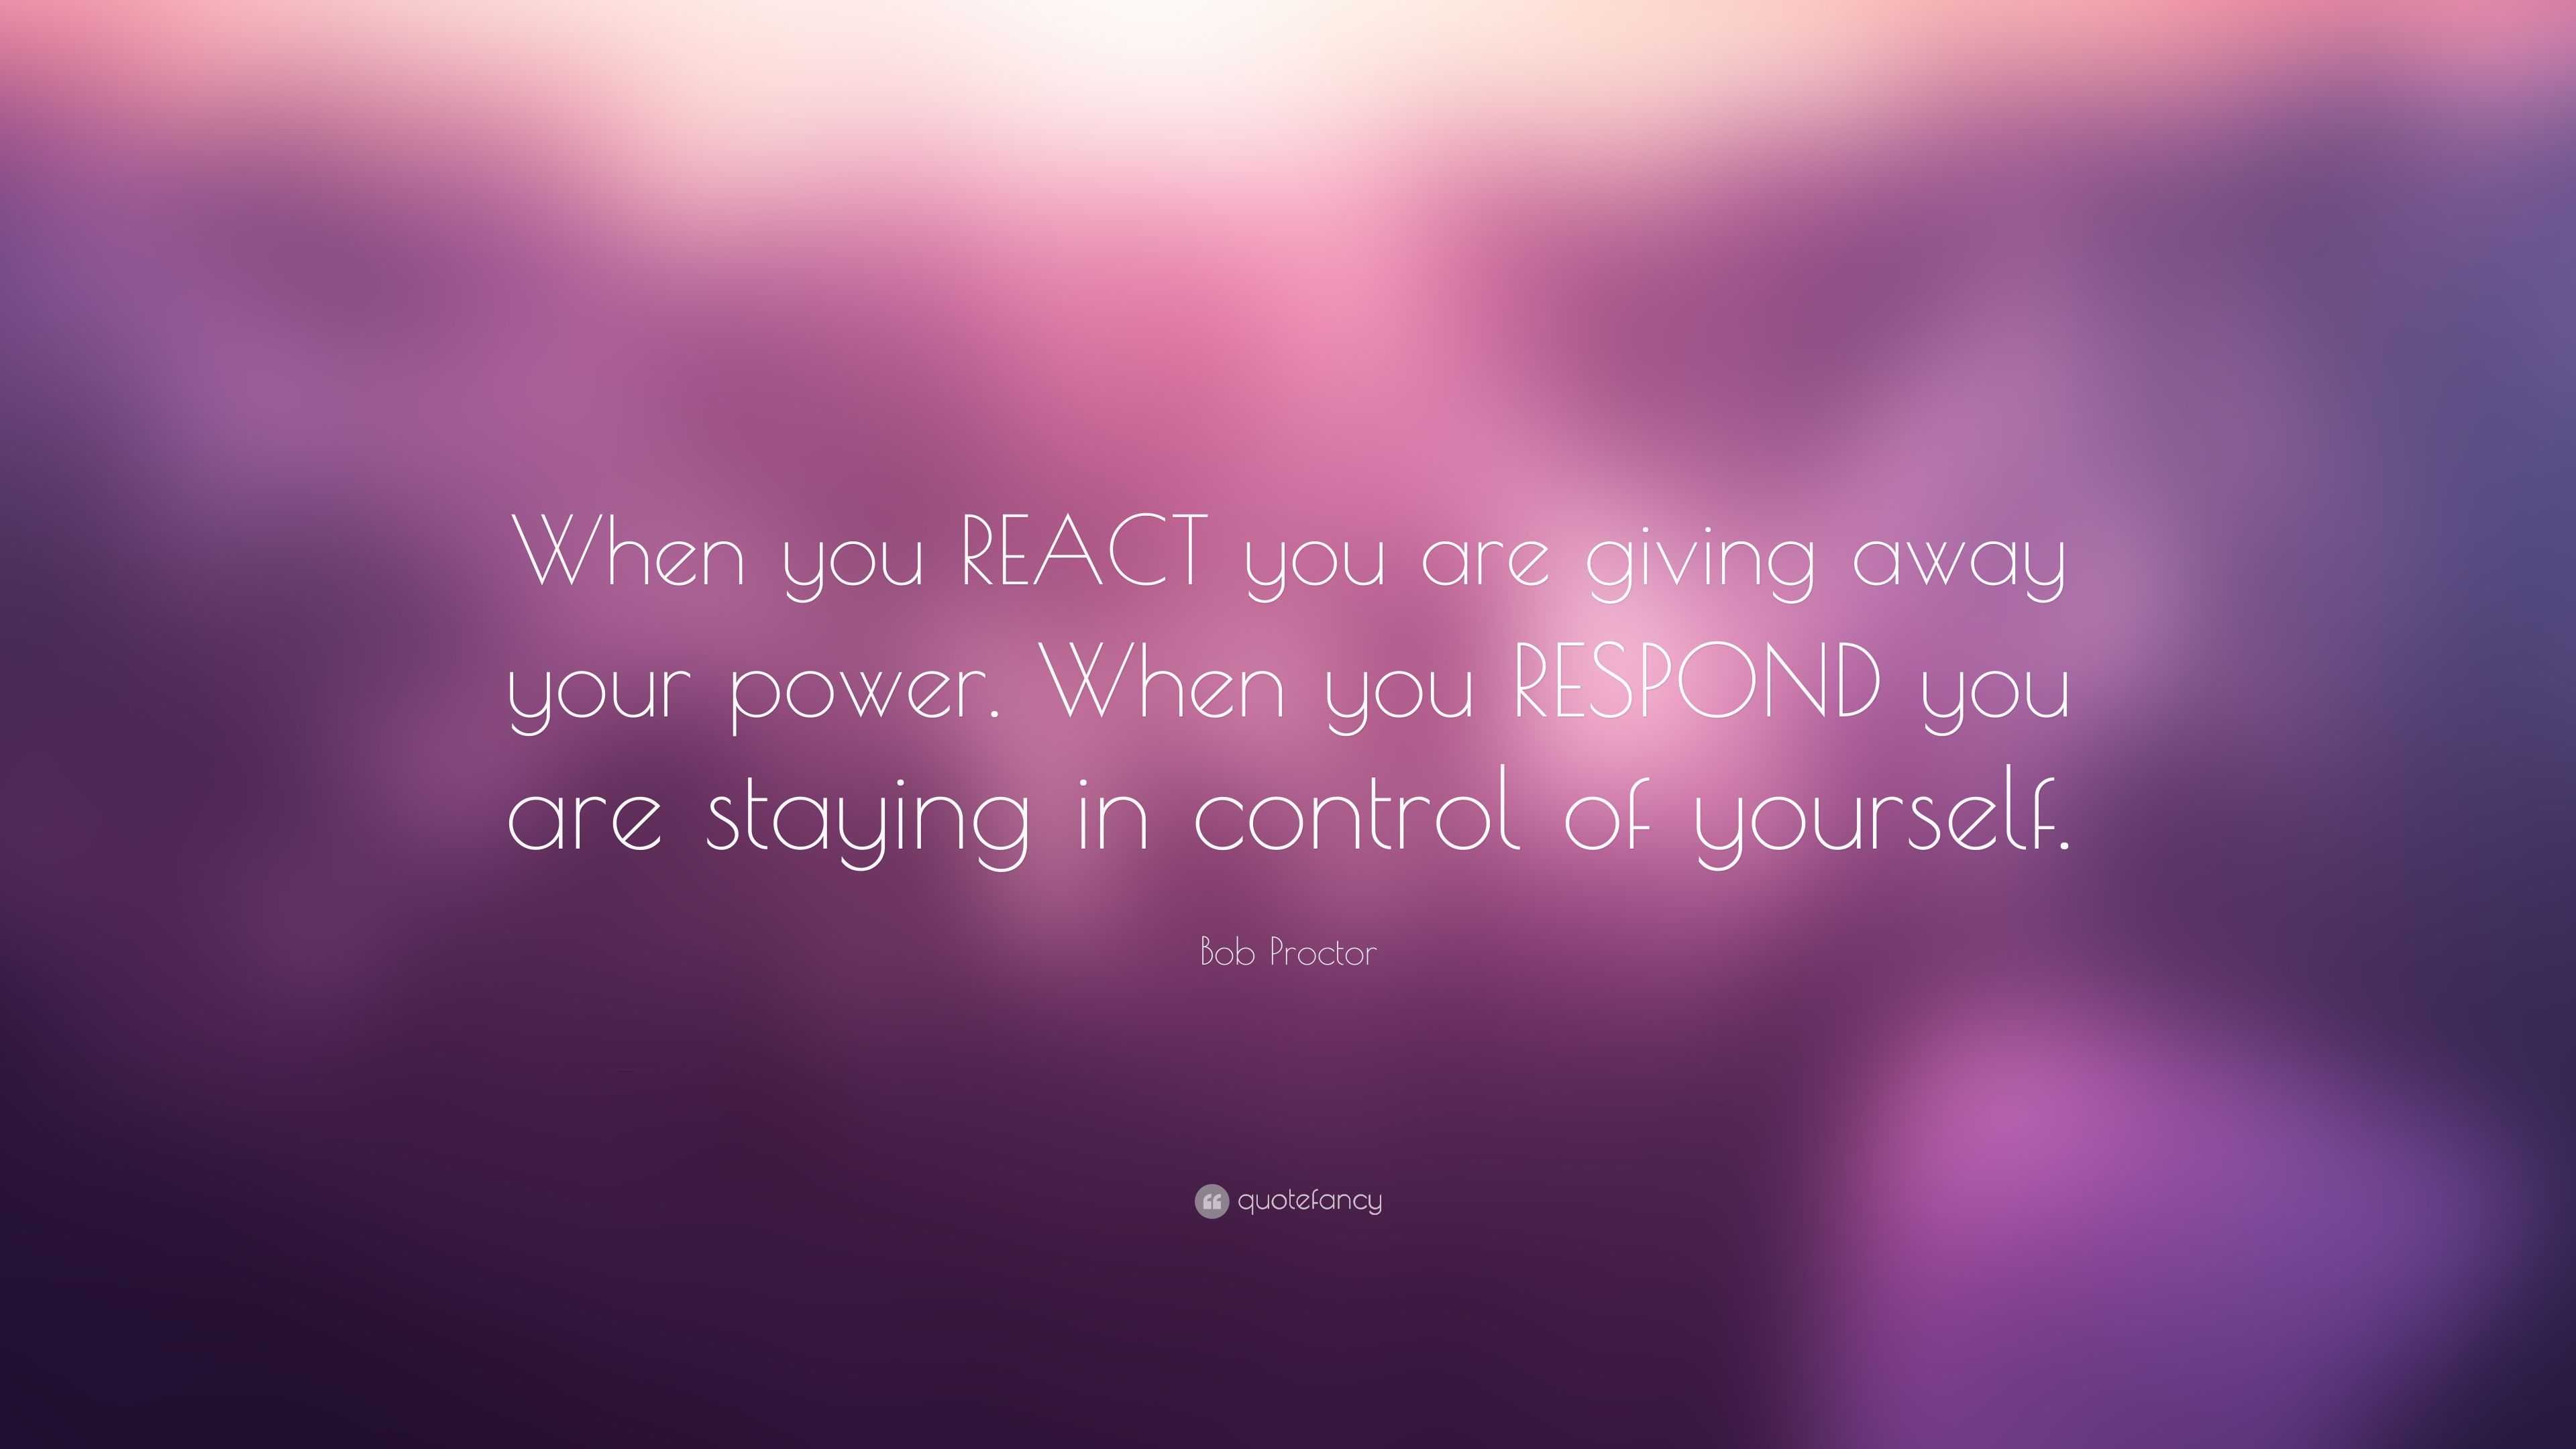 Bob Proctor Quote: “When you REACT you are giving away your power